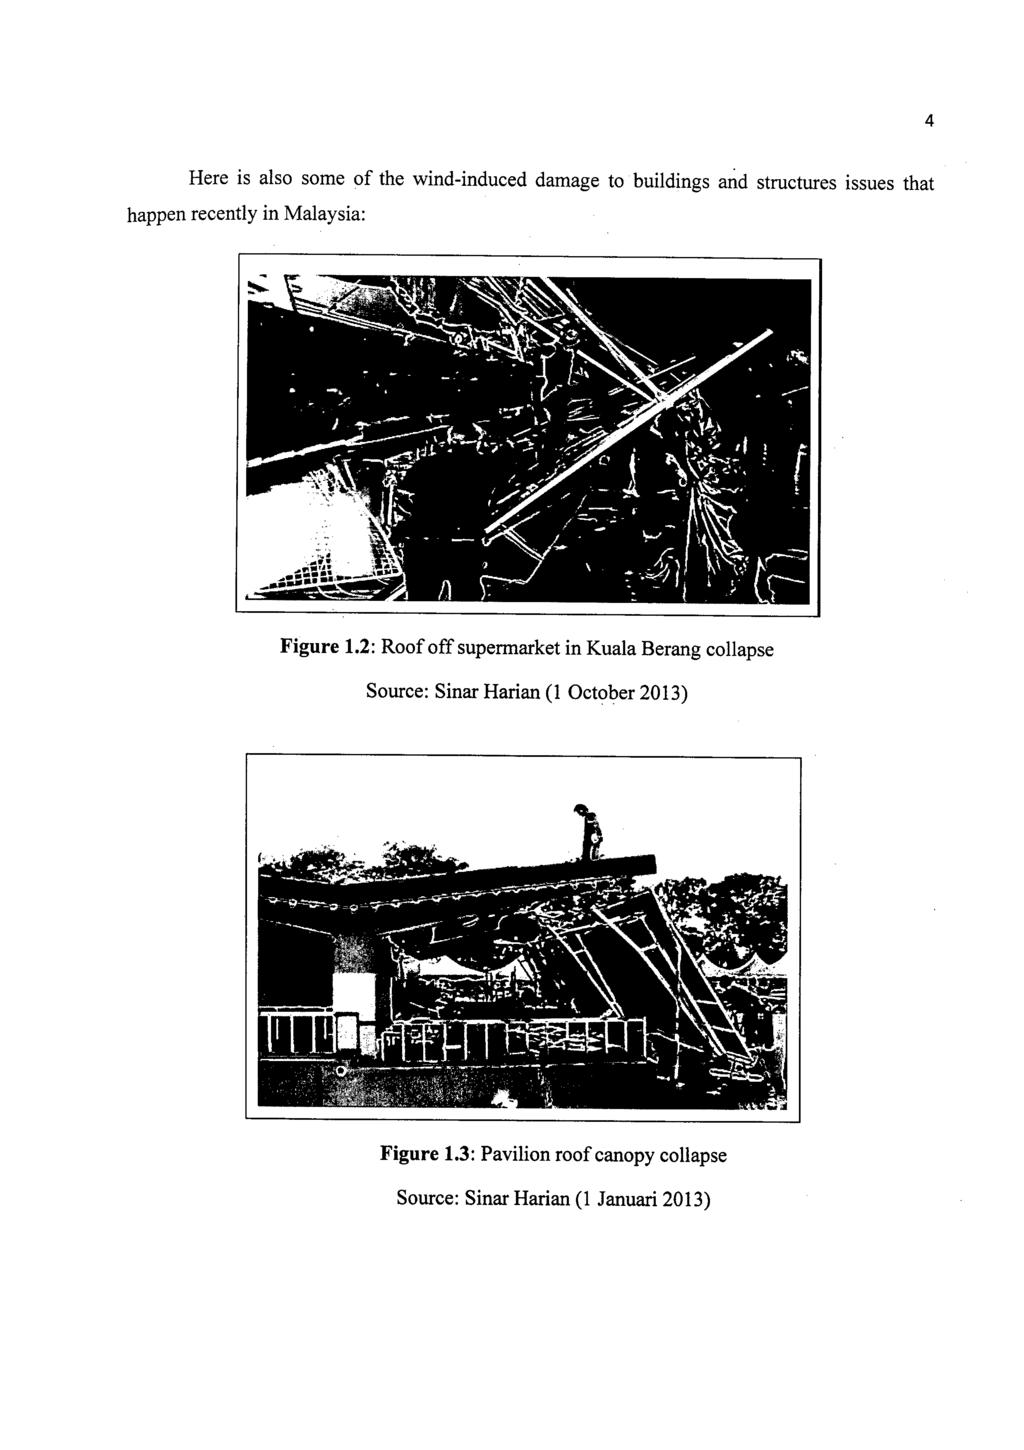 rd Here is also some of the wind-induced damage to buildings " and structures issues that happen recently in Malaysia: Figure 1.